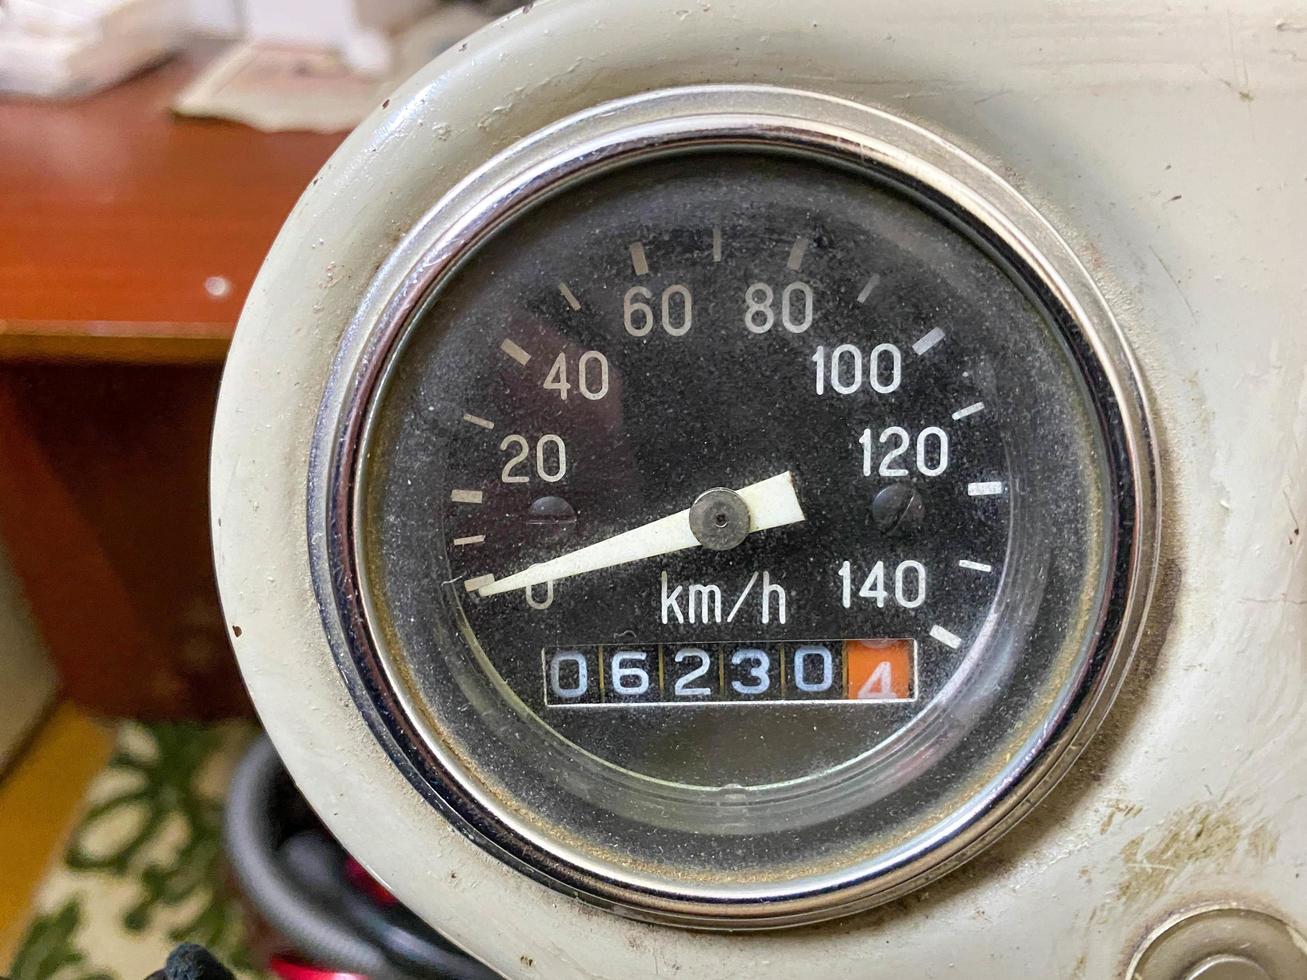 Old vintage retro round speedometer with sleeper in kilometers per hour. Riding speed measuring device photo